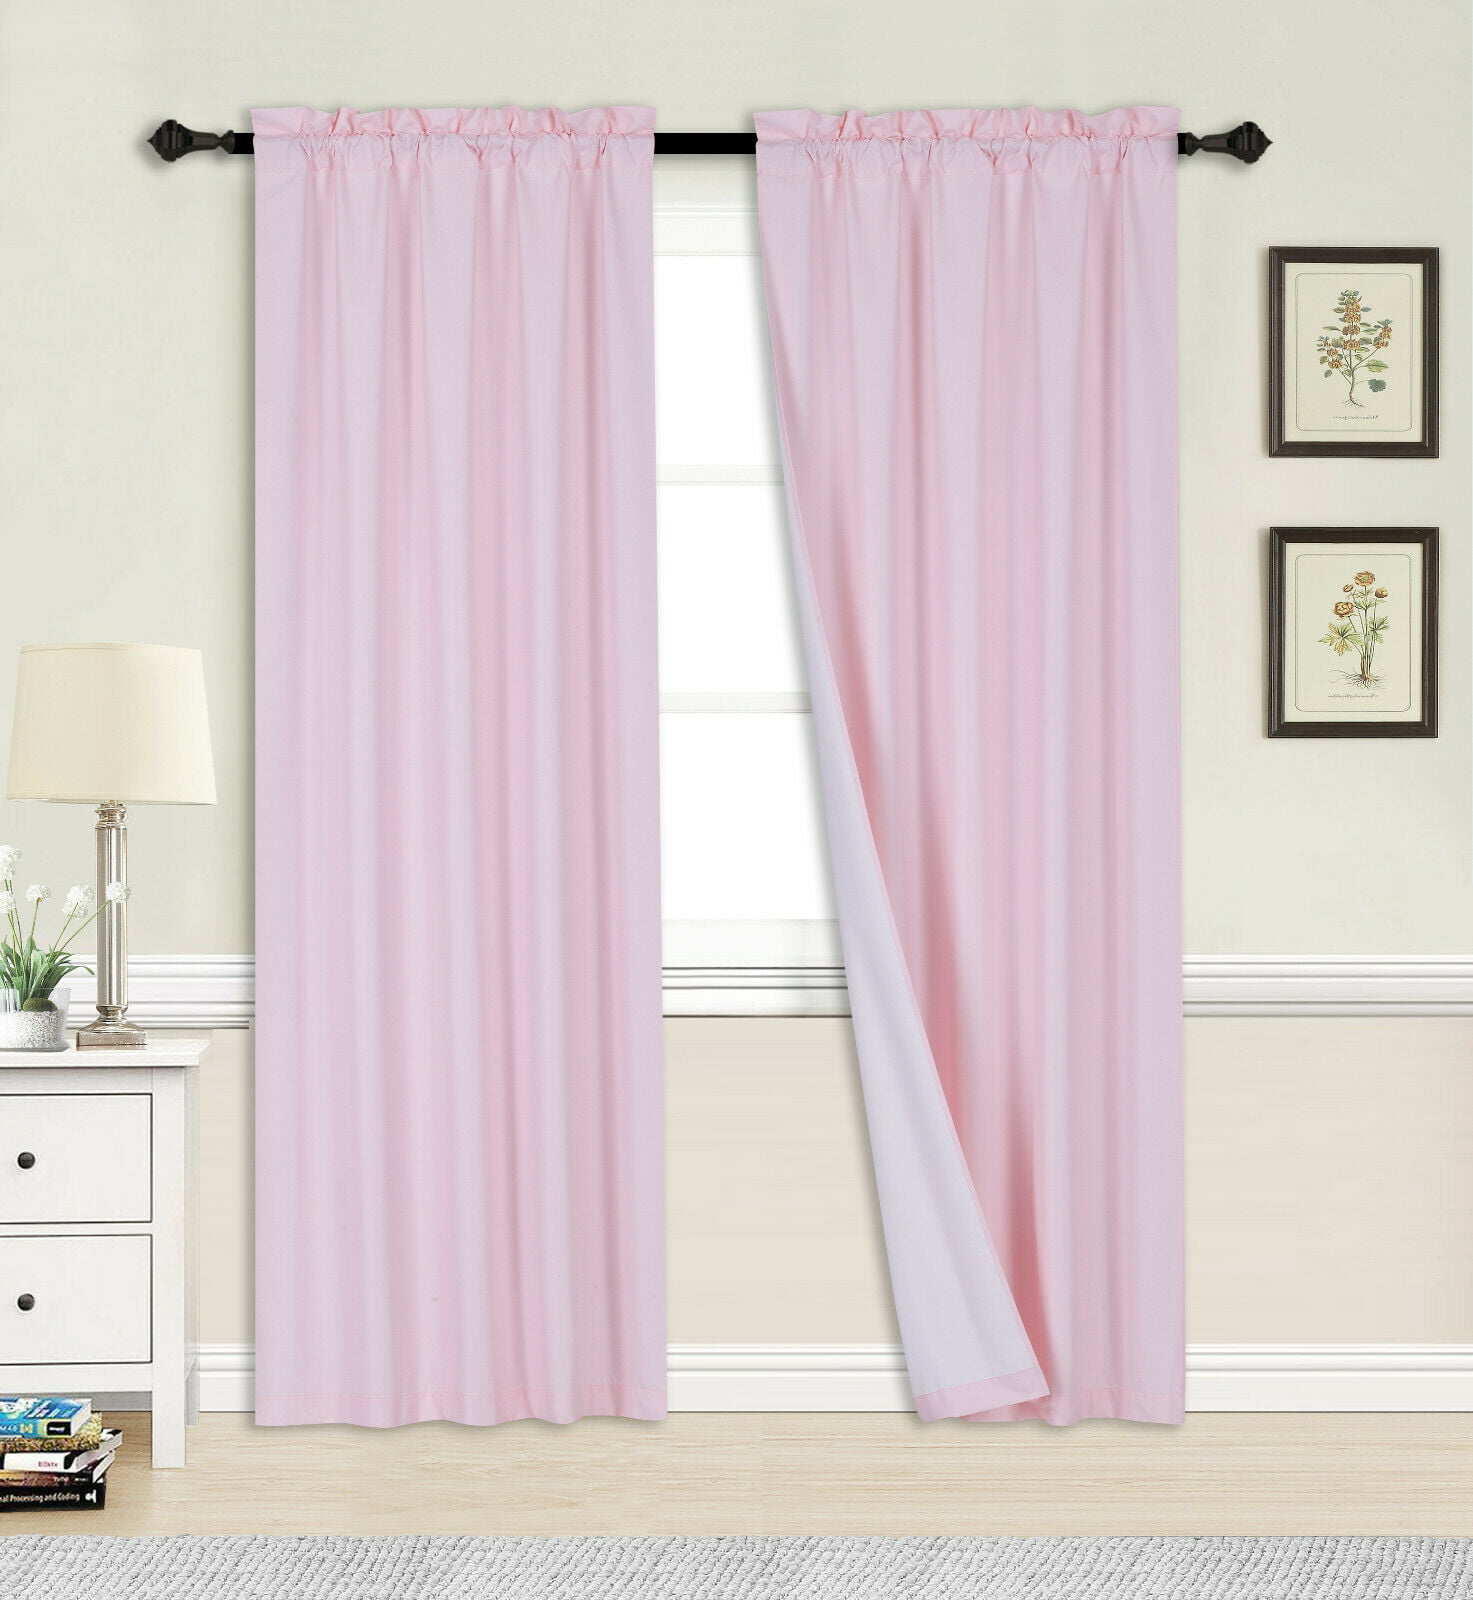 1 Set Rod Pocket Lined Thermal Blackout Window Treatment Curtain Panels R64 63" 